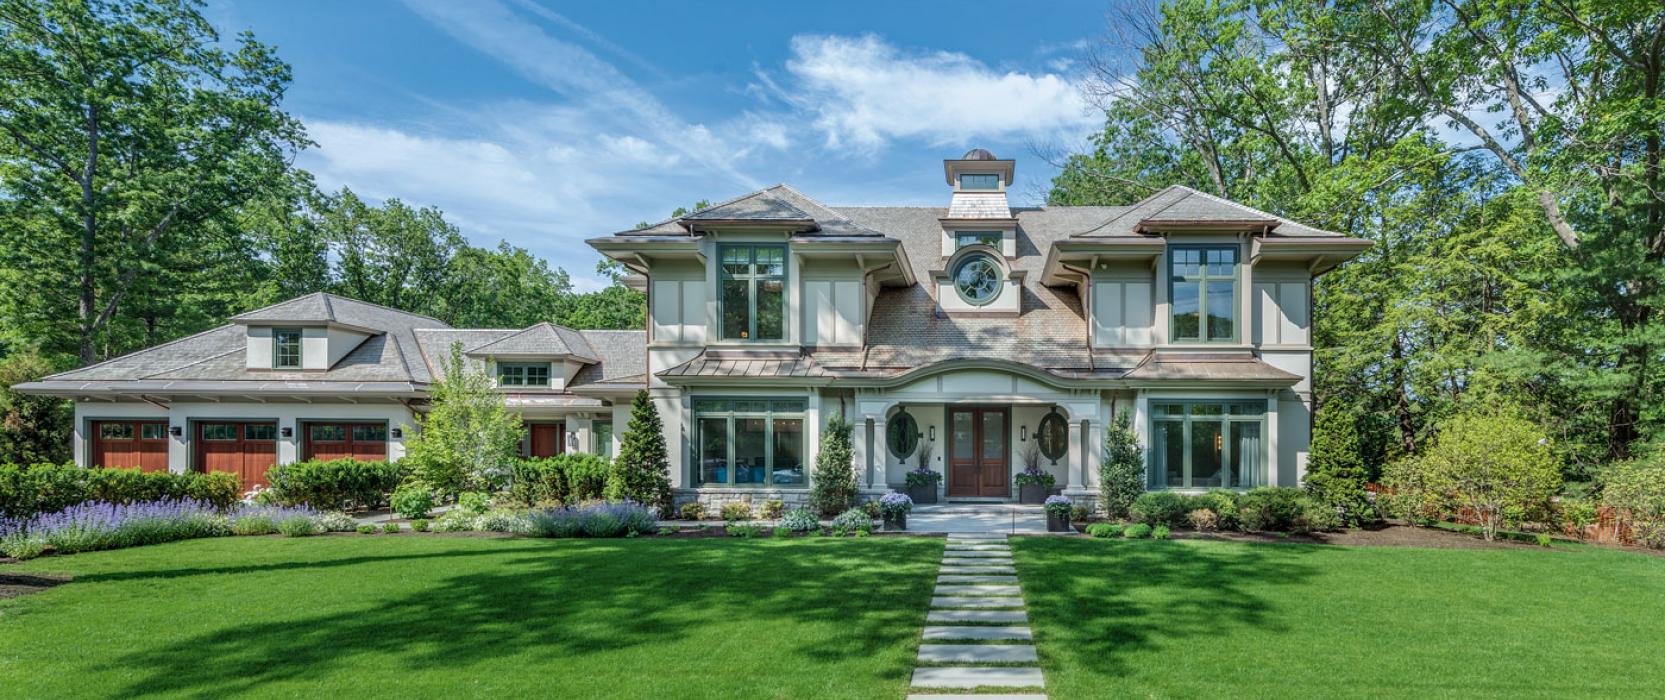 The Arts and Crafts-style meets English Country in a custom suburban Boston home 